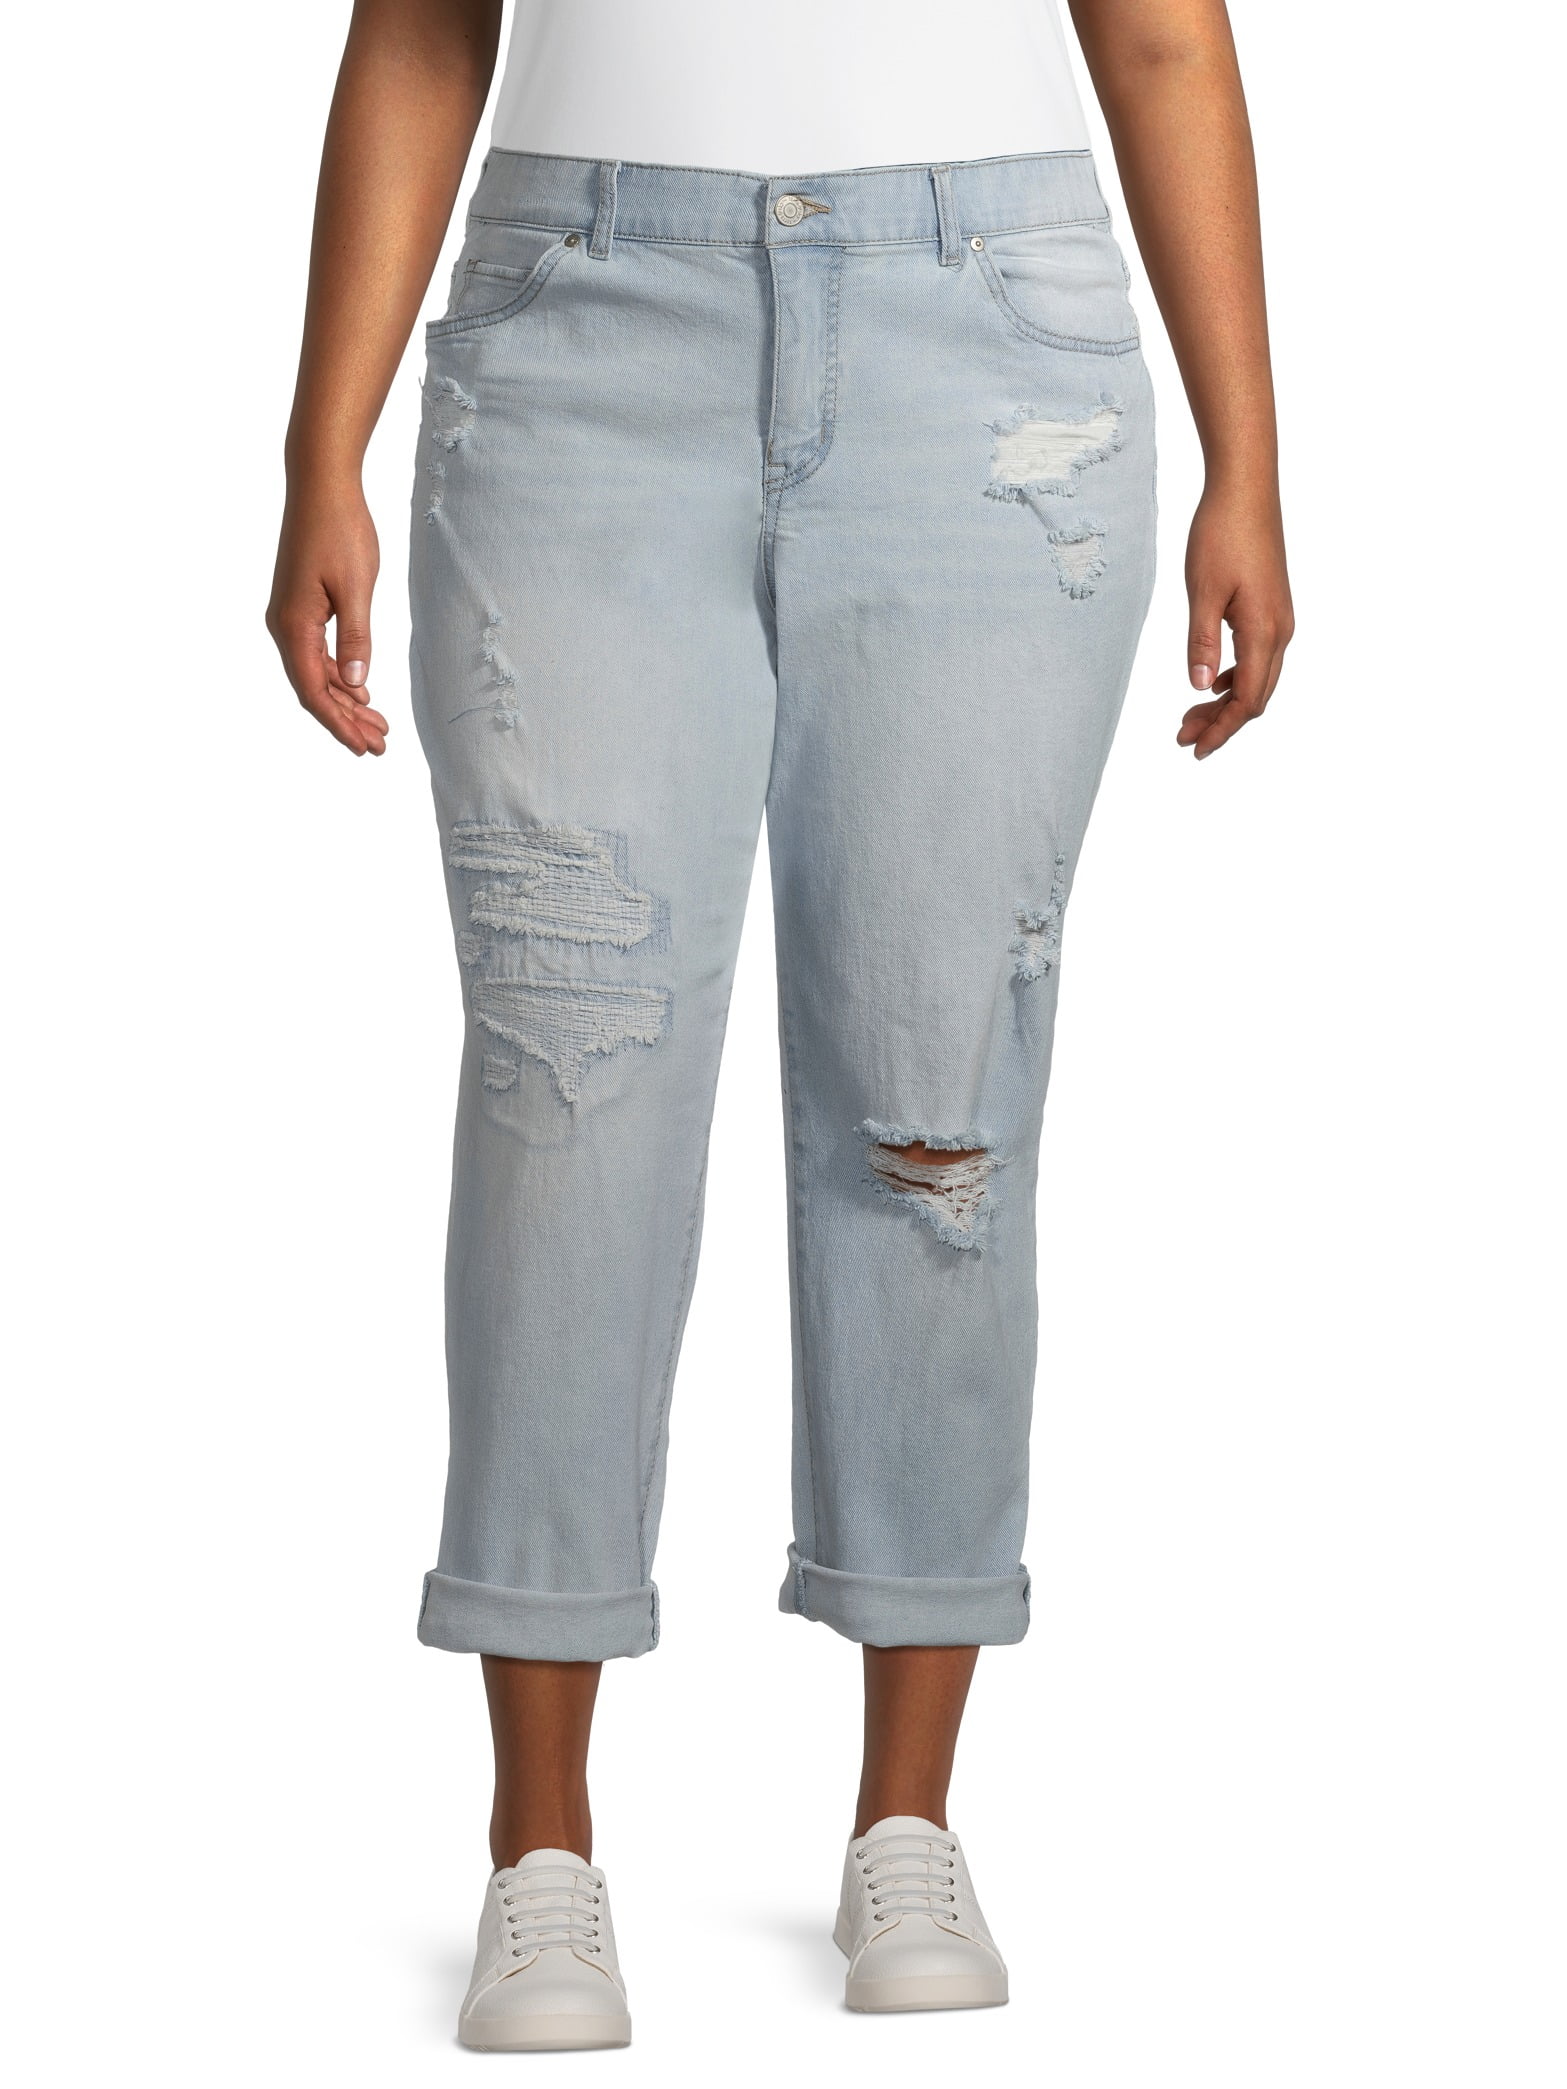 terra and sky bootcut jeans